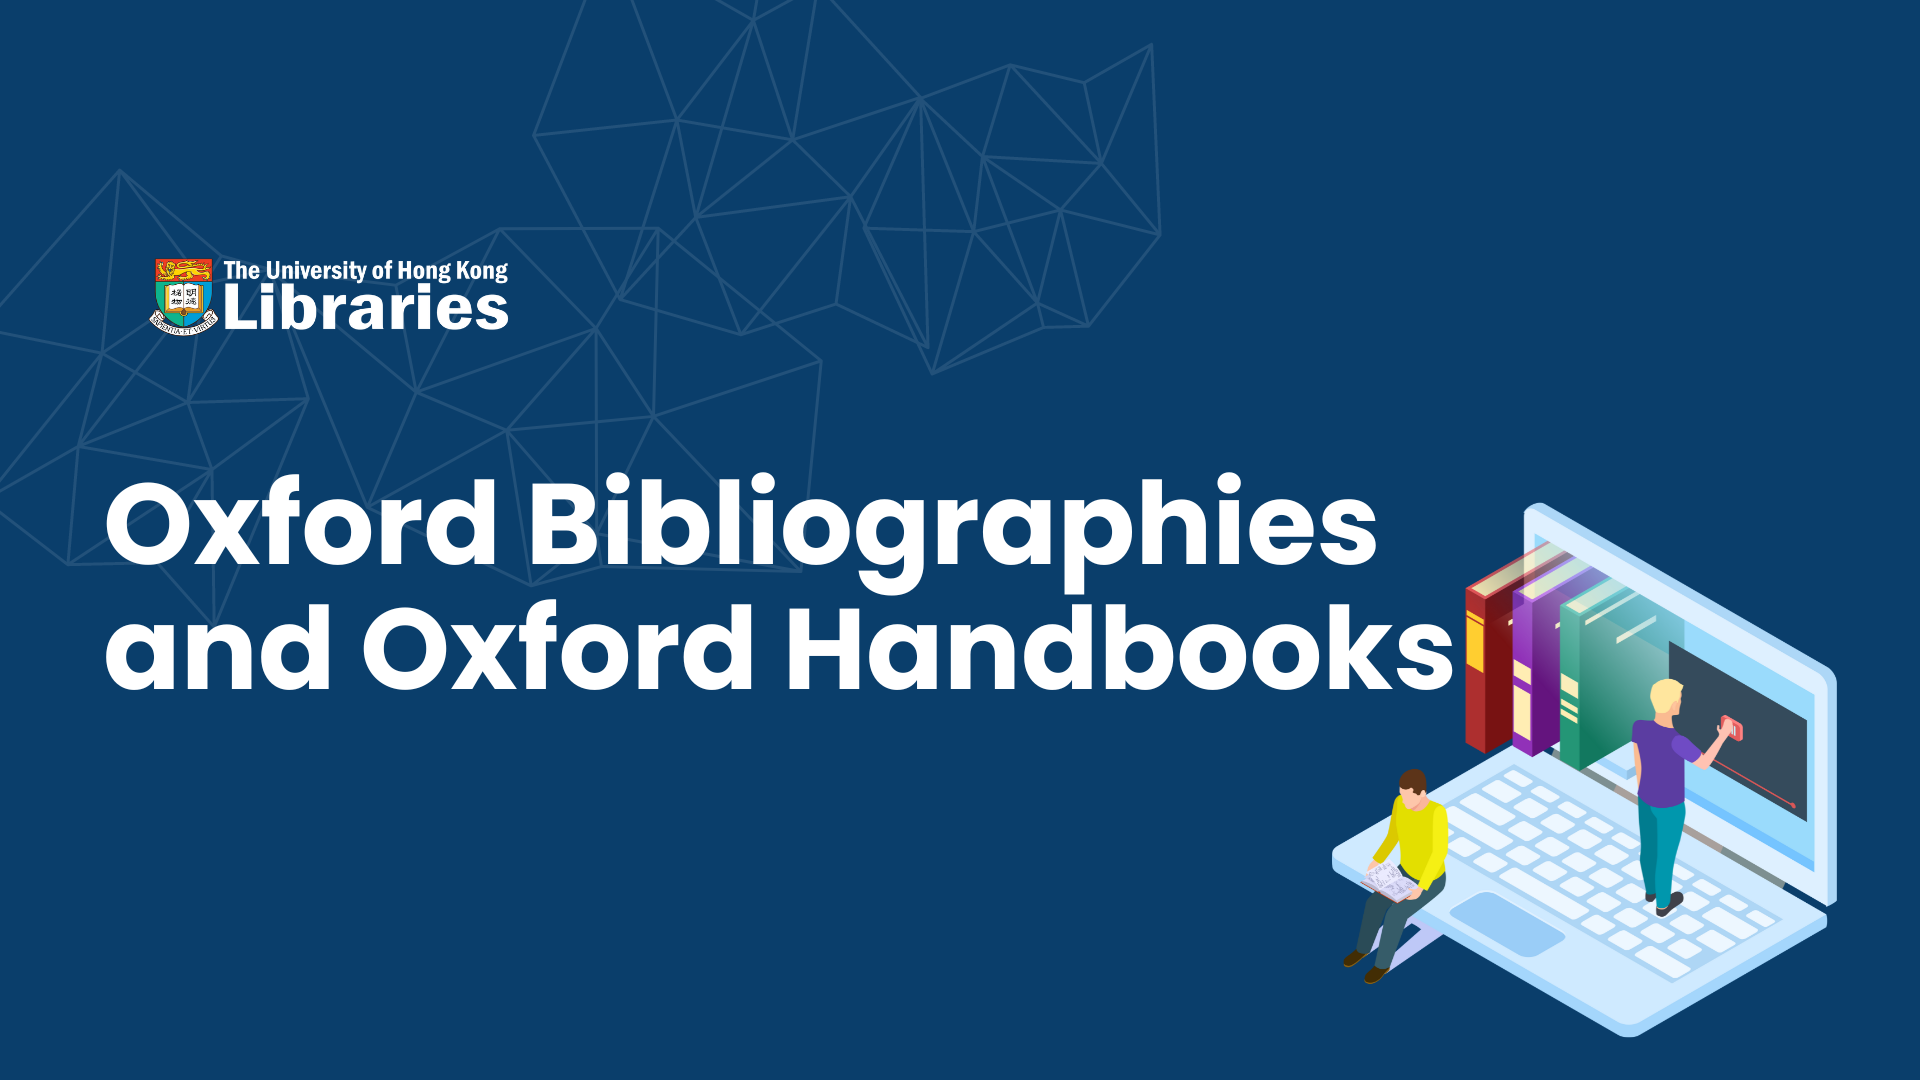 Oxford Bibliographies and Oxford Handbooks